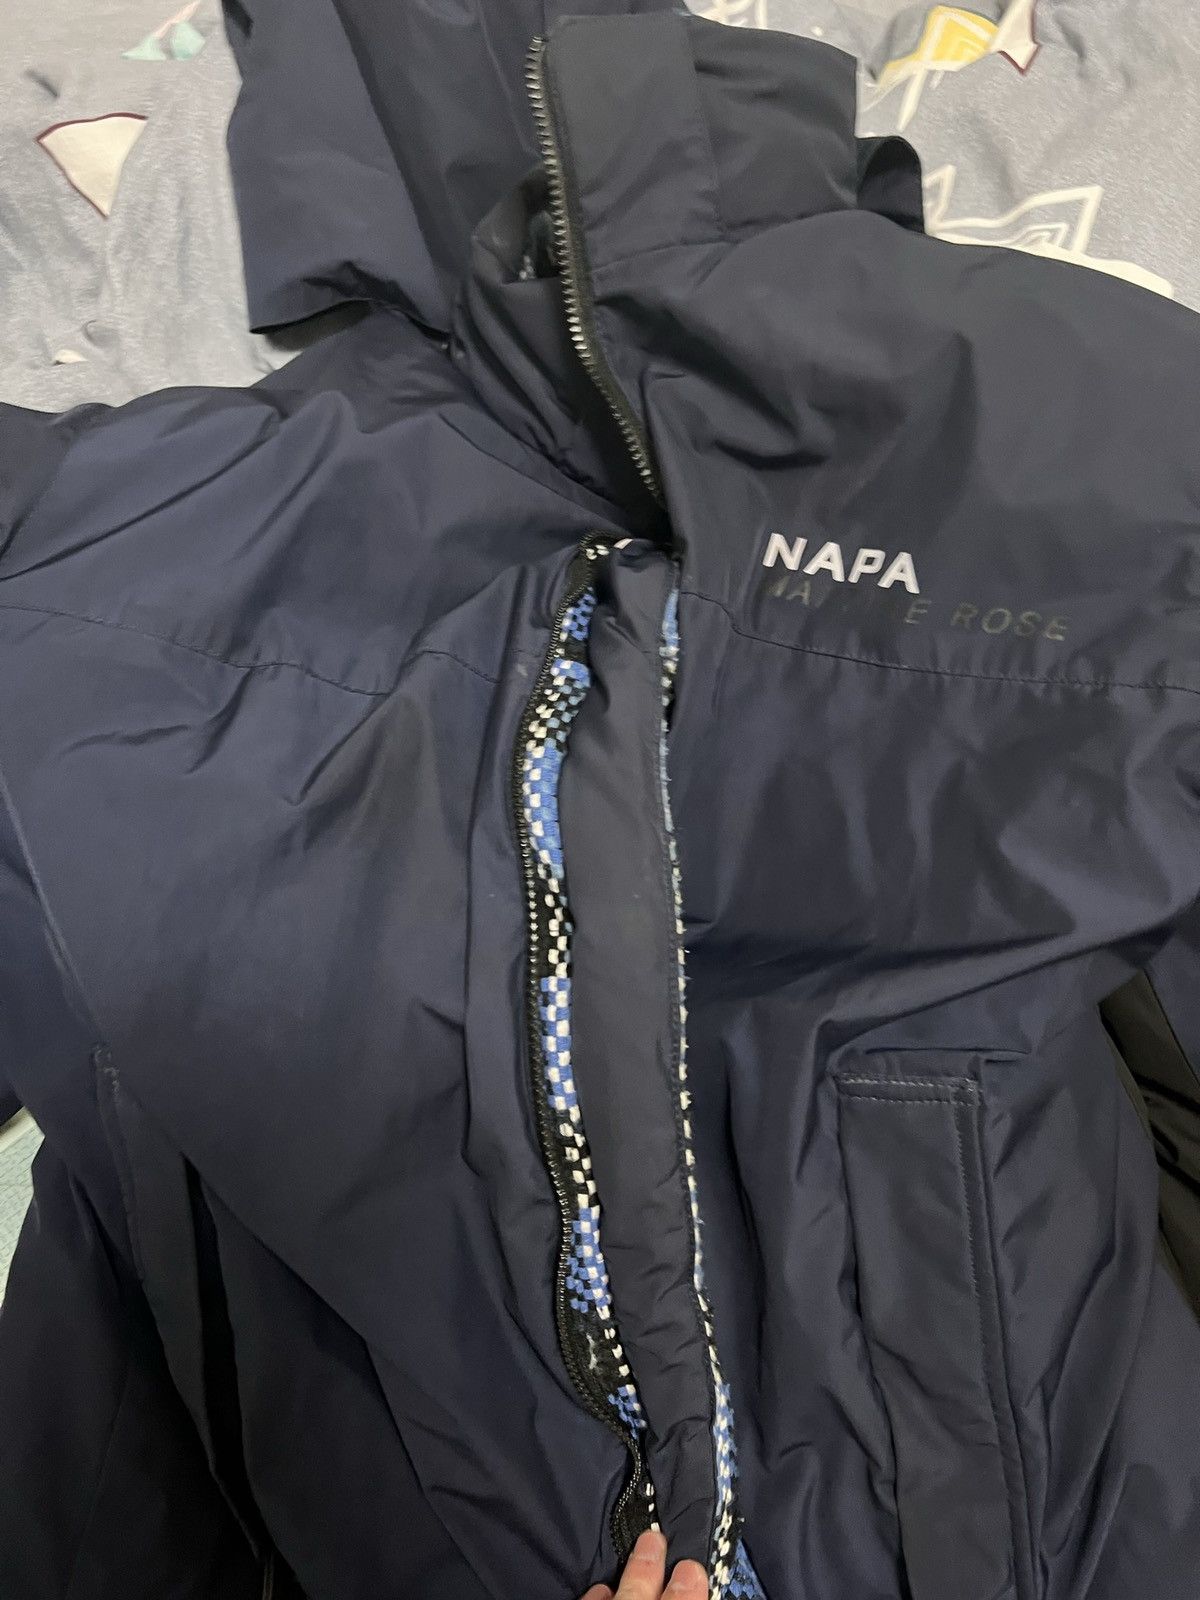 Martine Rose NAPA by Martine Rose A-Acho jacket | Grailed